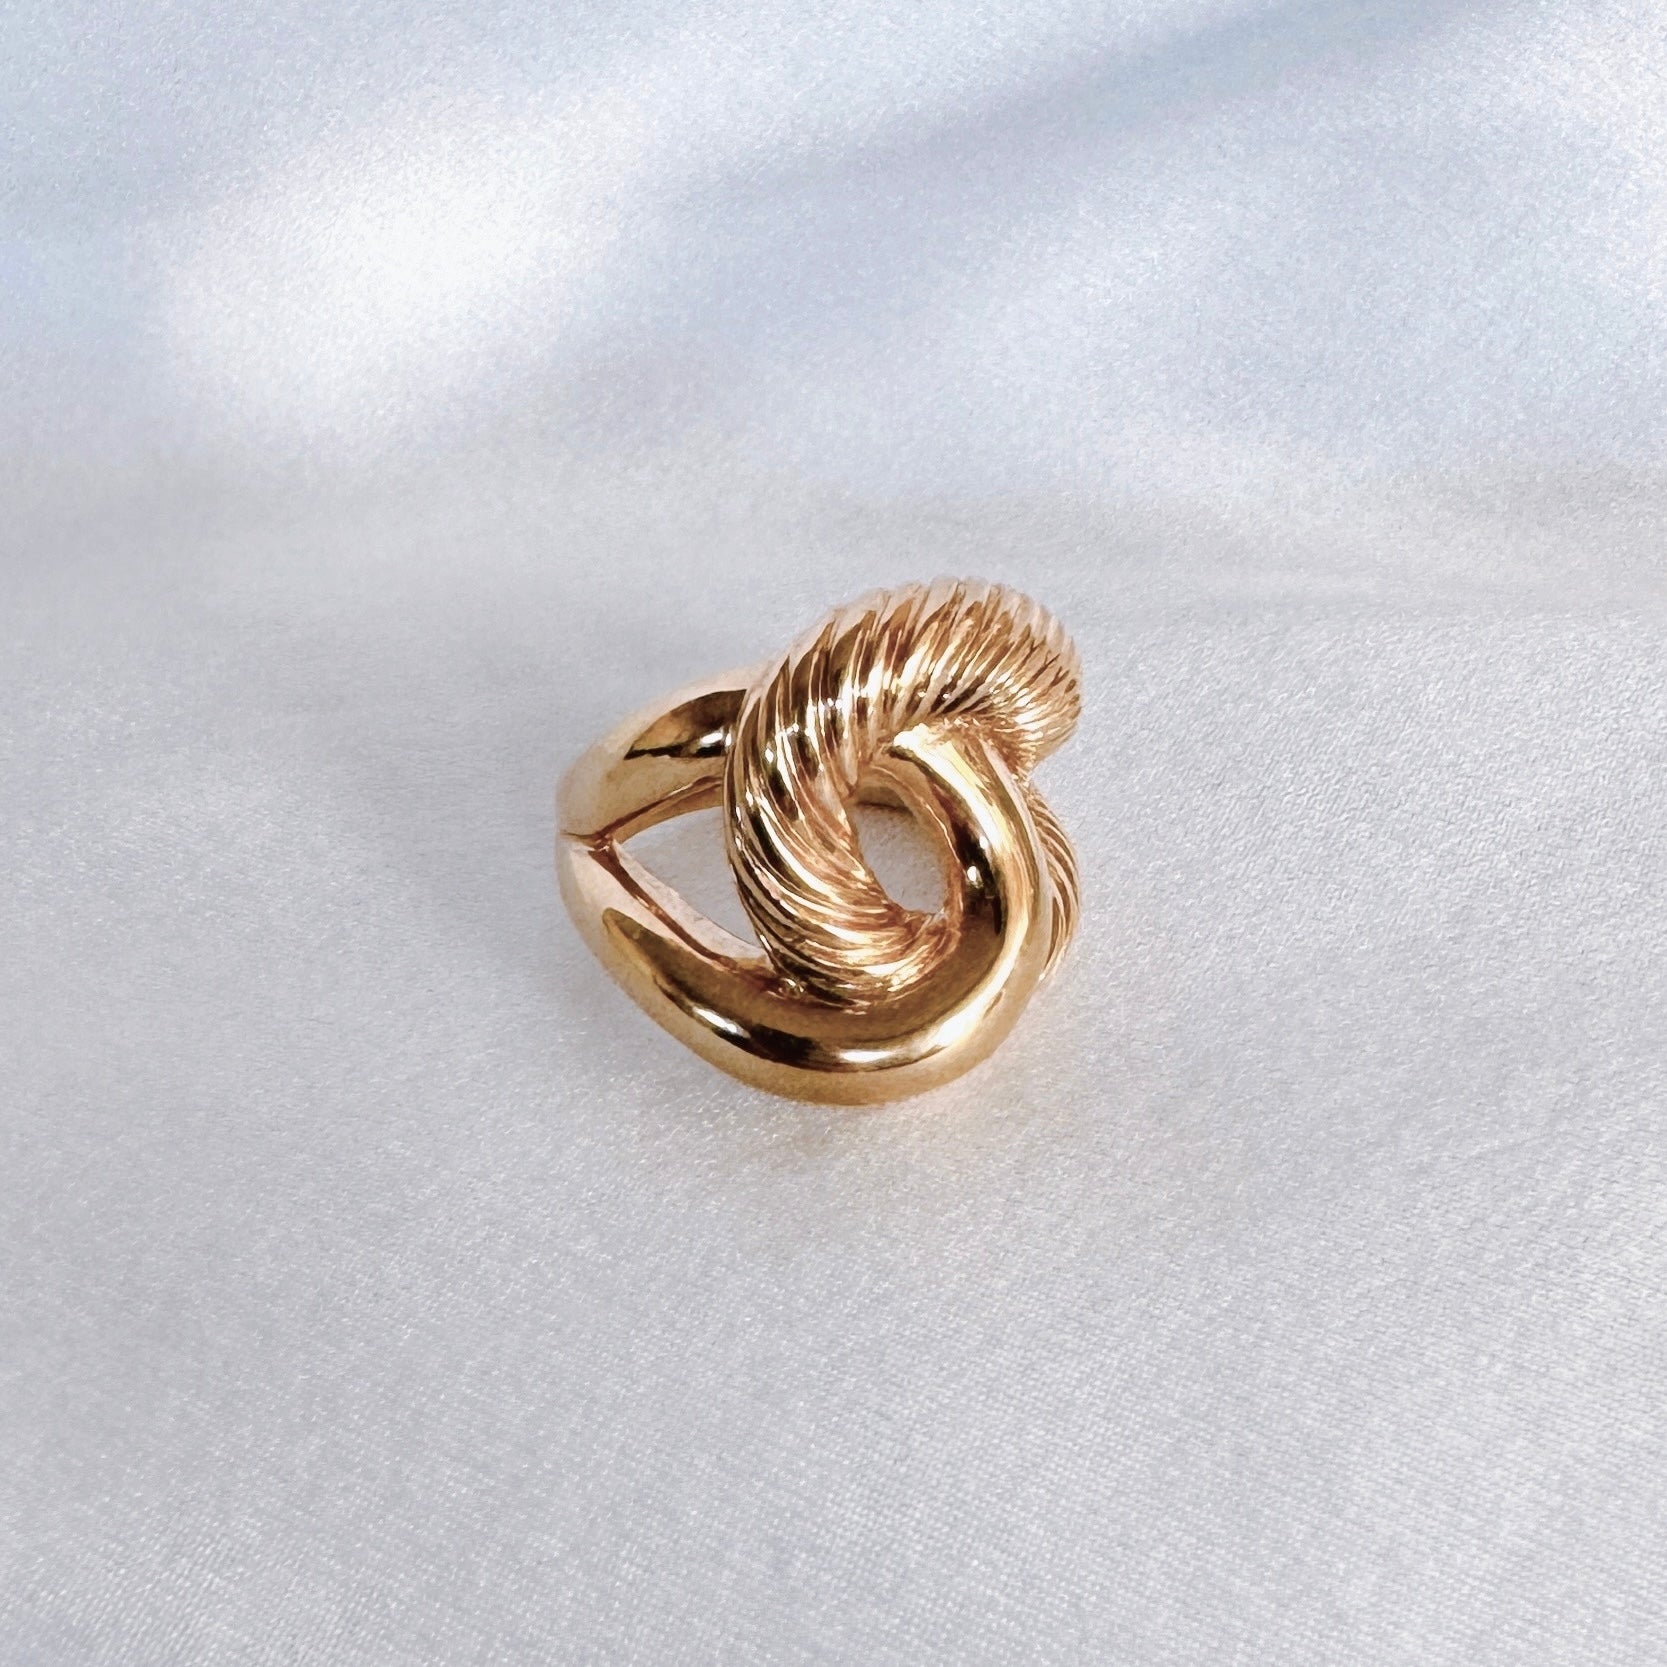 Gold-plated “Intertwined braided” ring